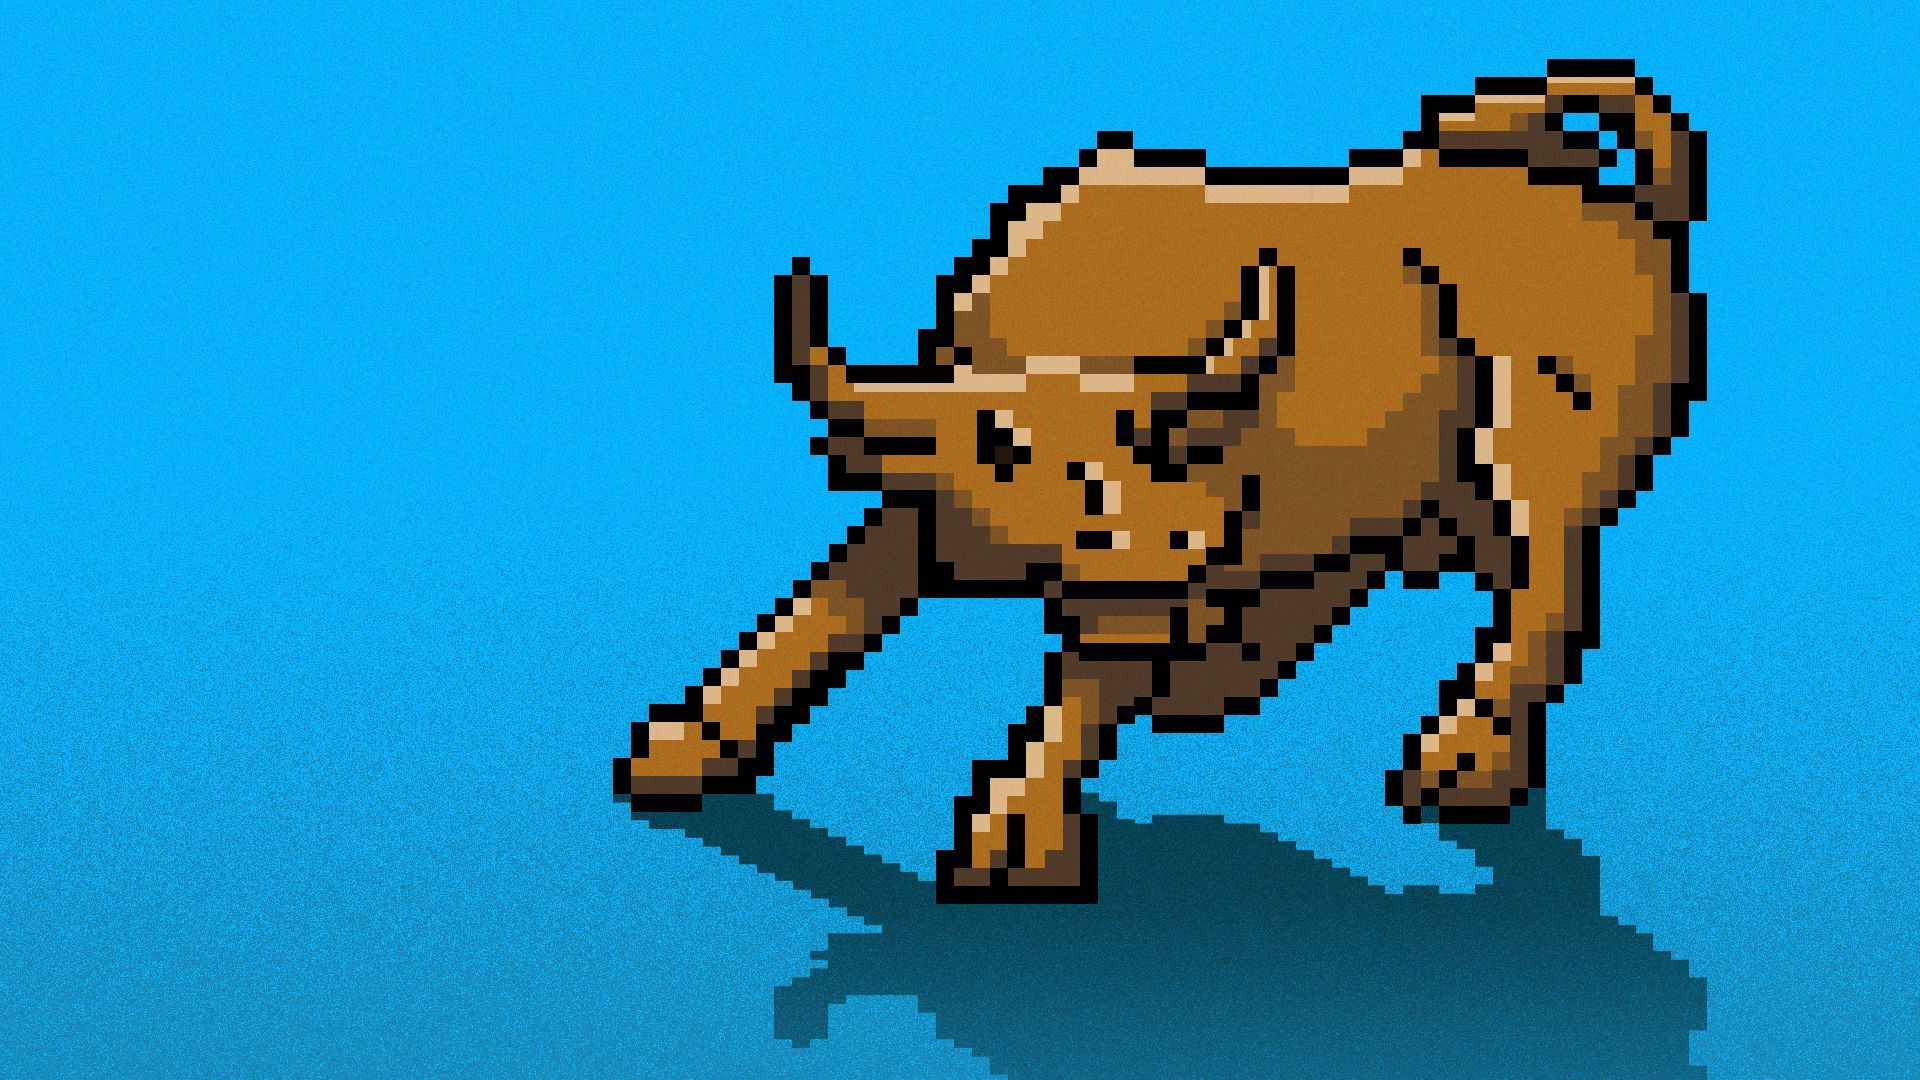 Illustration of the Wall Street Bull in a pixel art style.